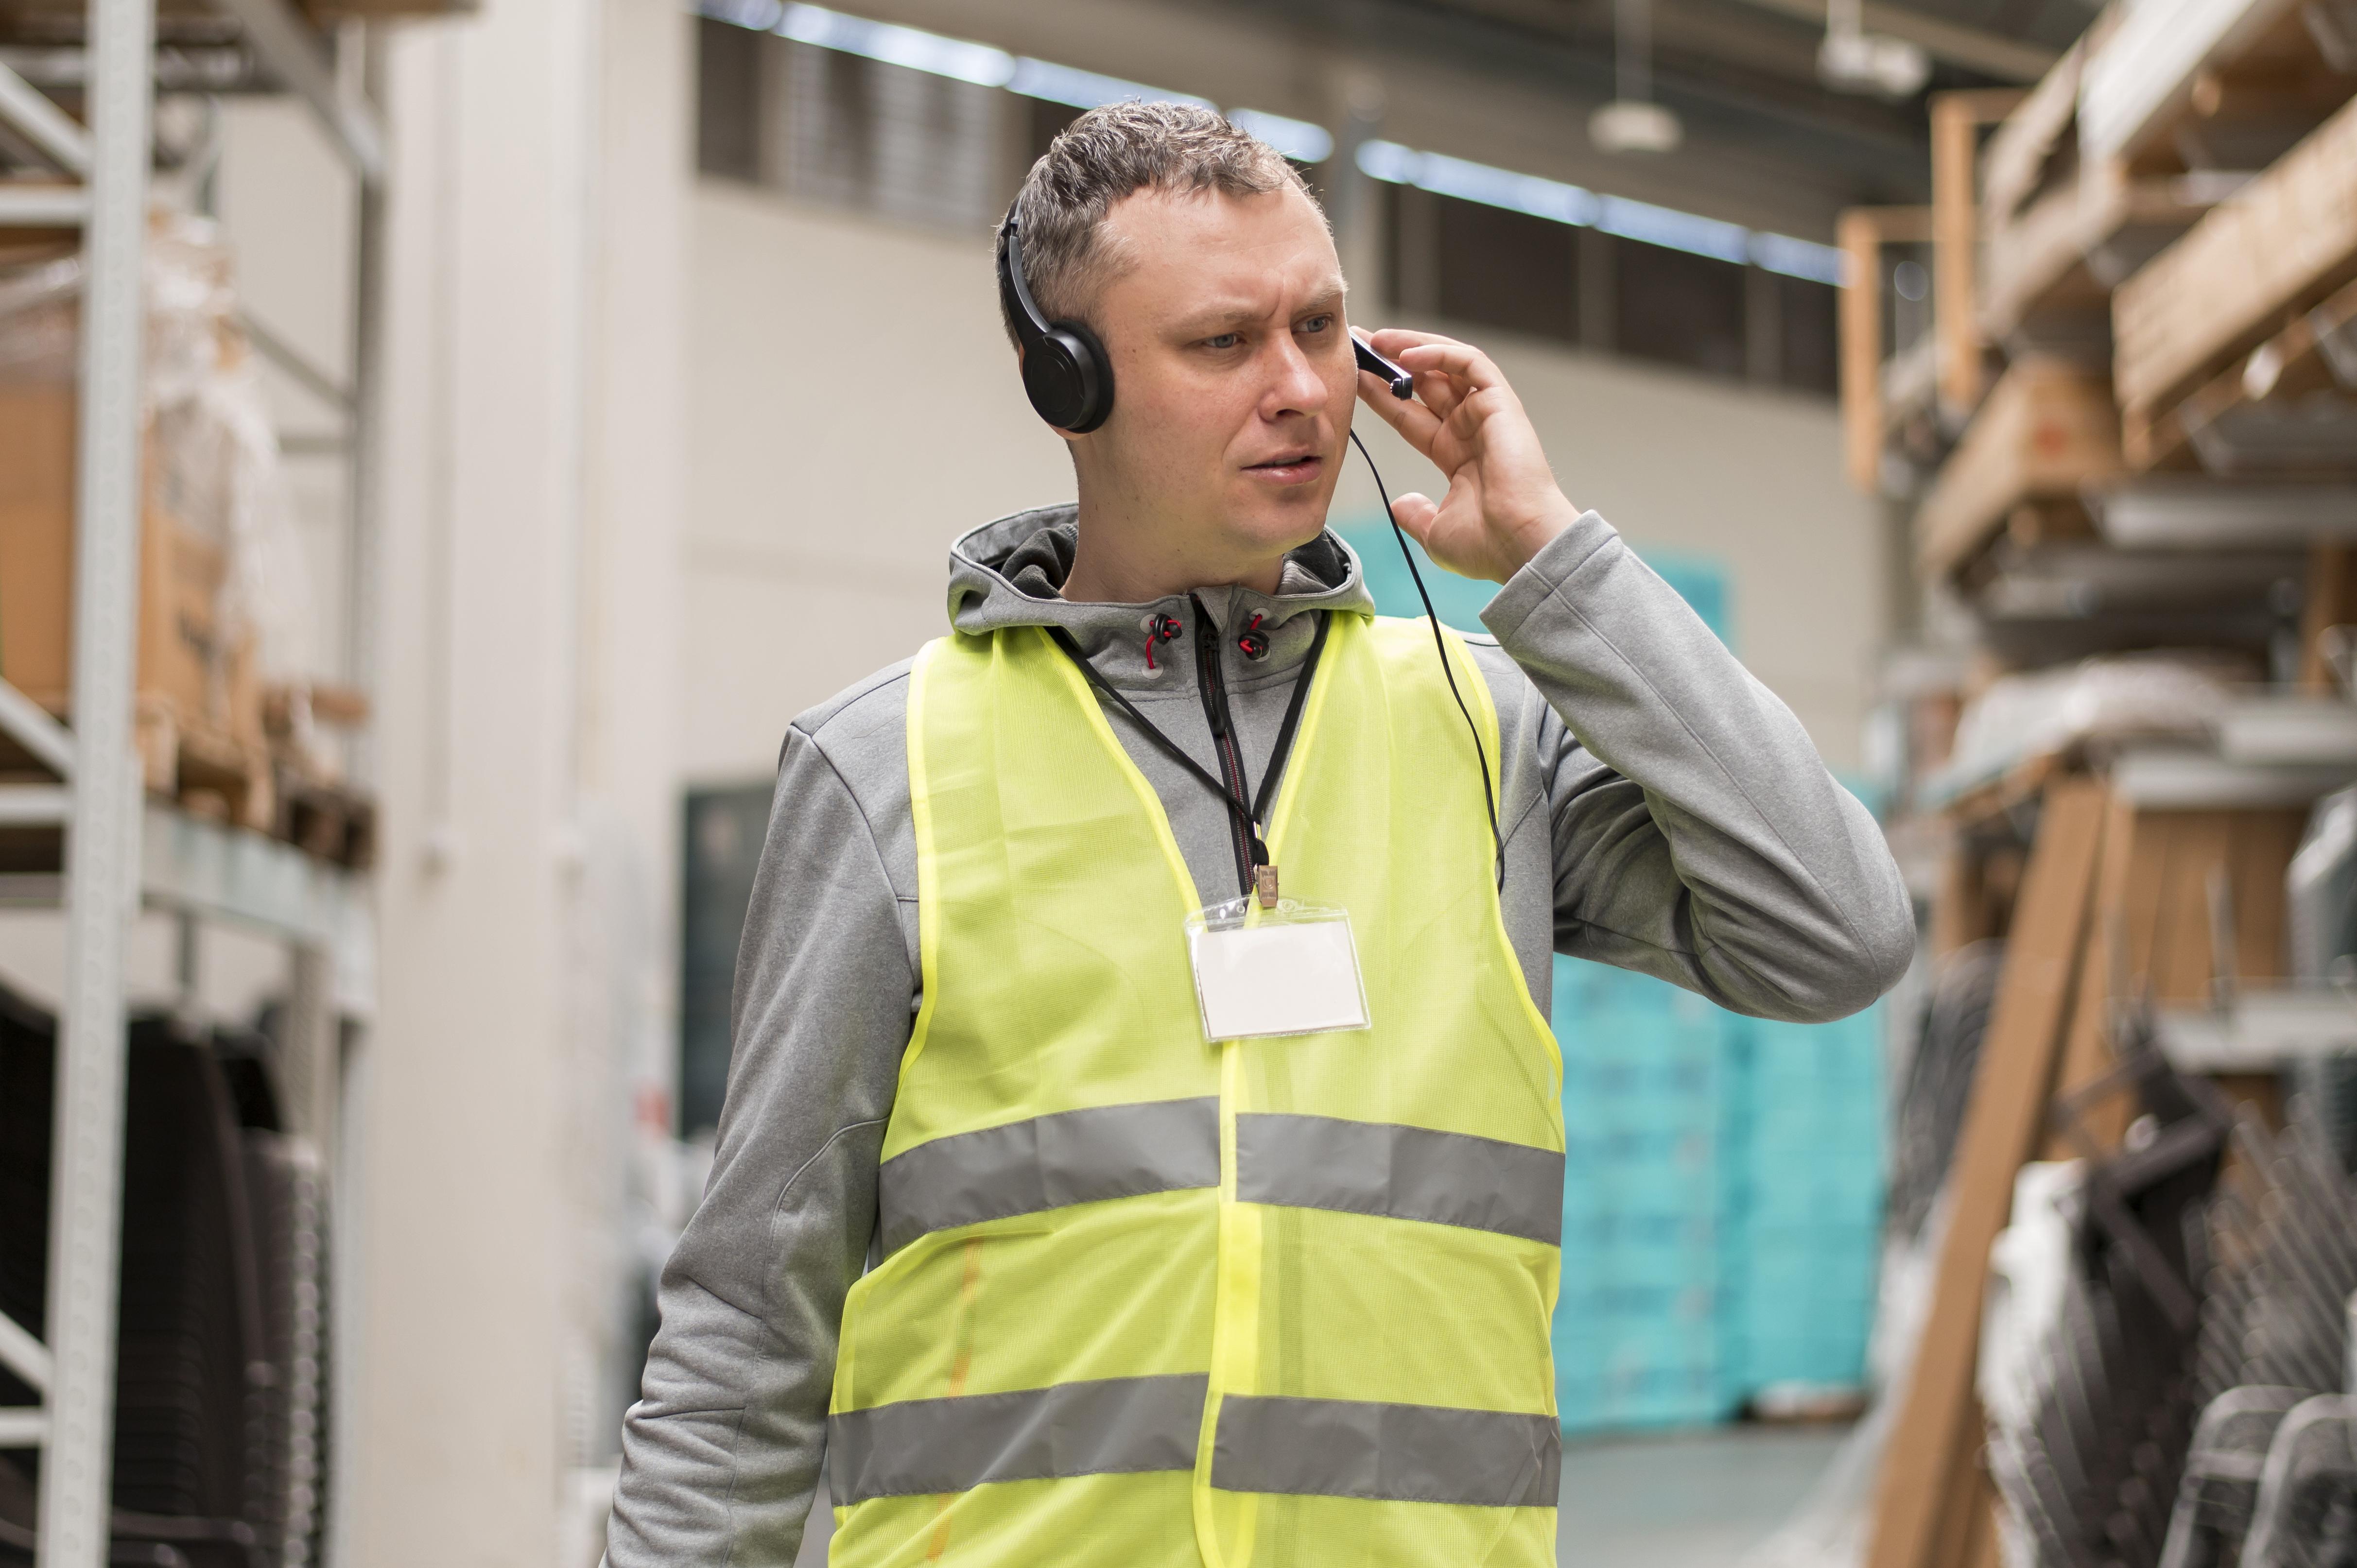 The future of Warehousing: Voice Directed Warehouse Operations